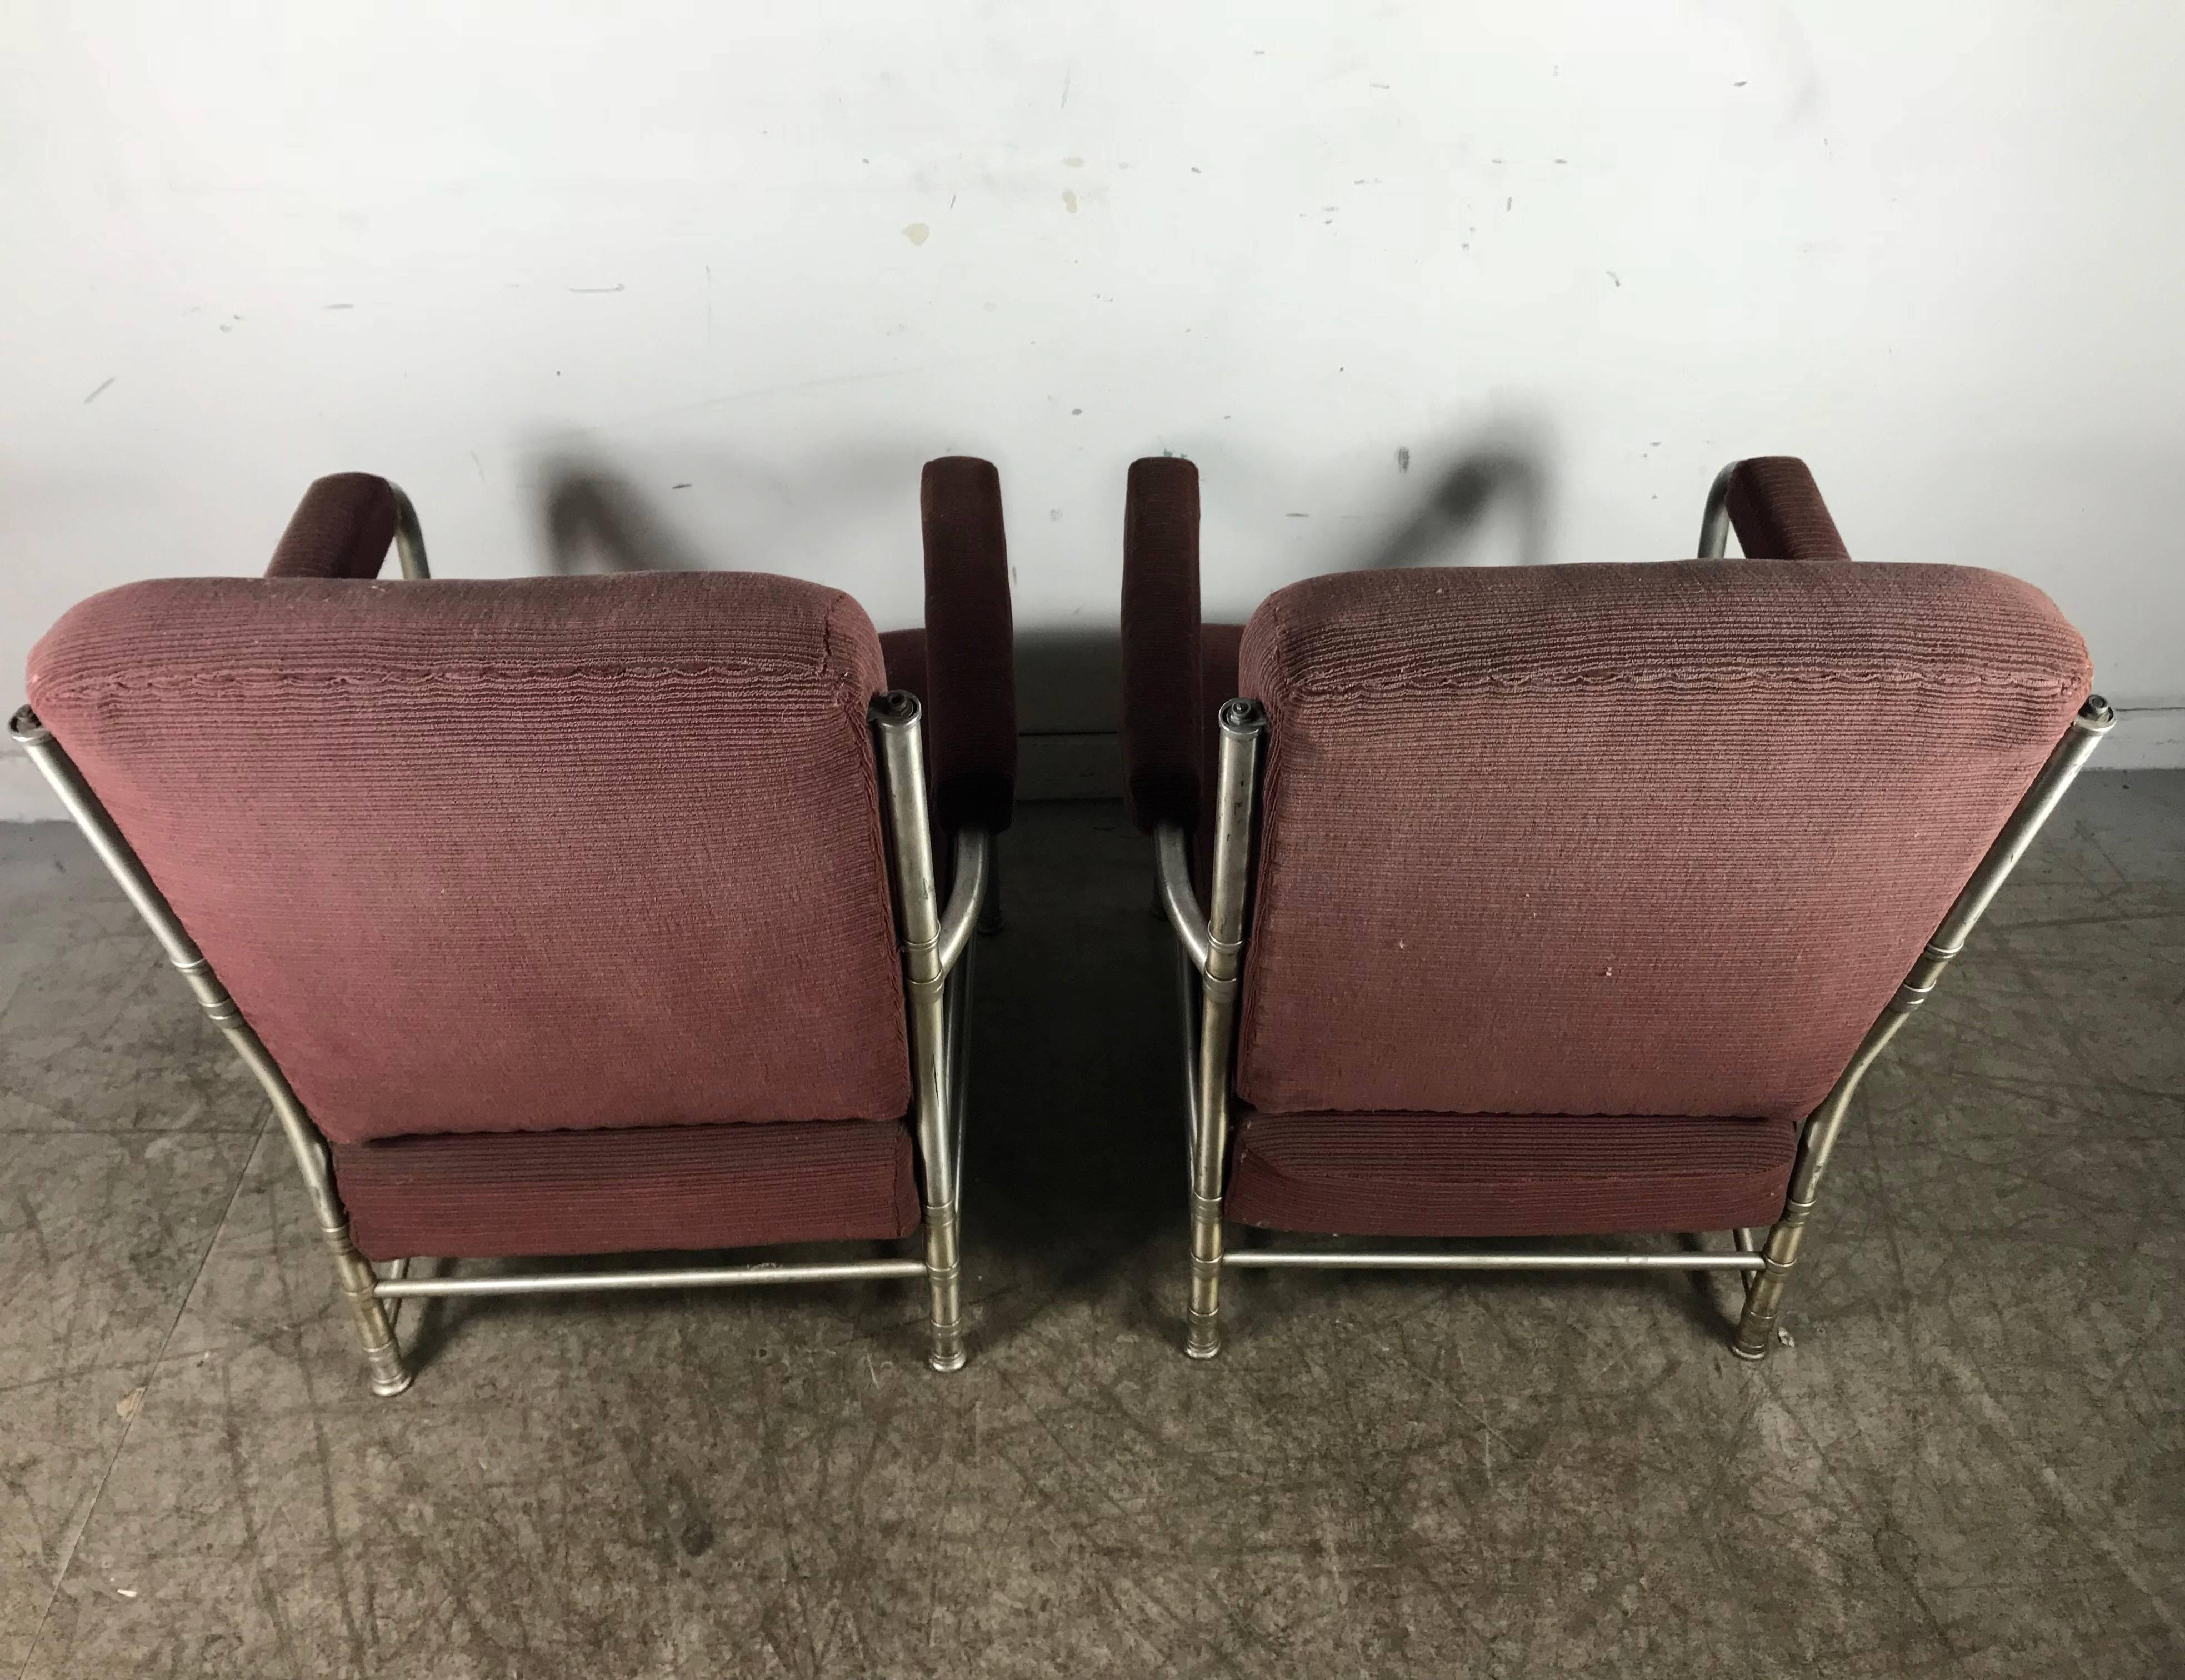 Classic Pair of Art Deco Machine Age Aluminium Lounge Chairs by Warren McArthur For Sale 2